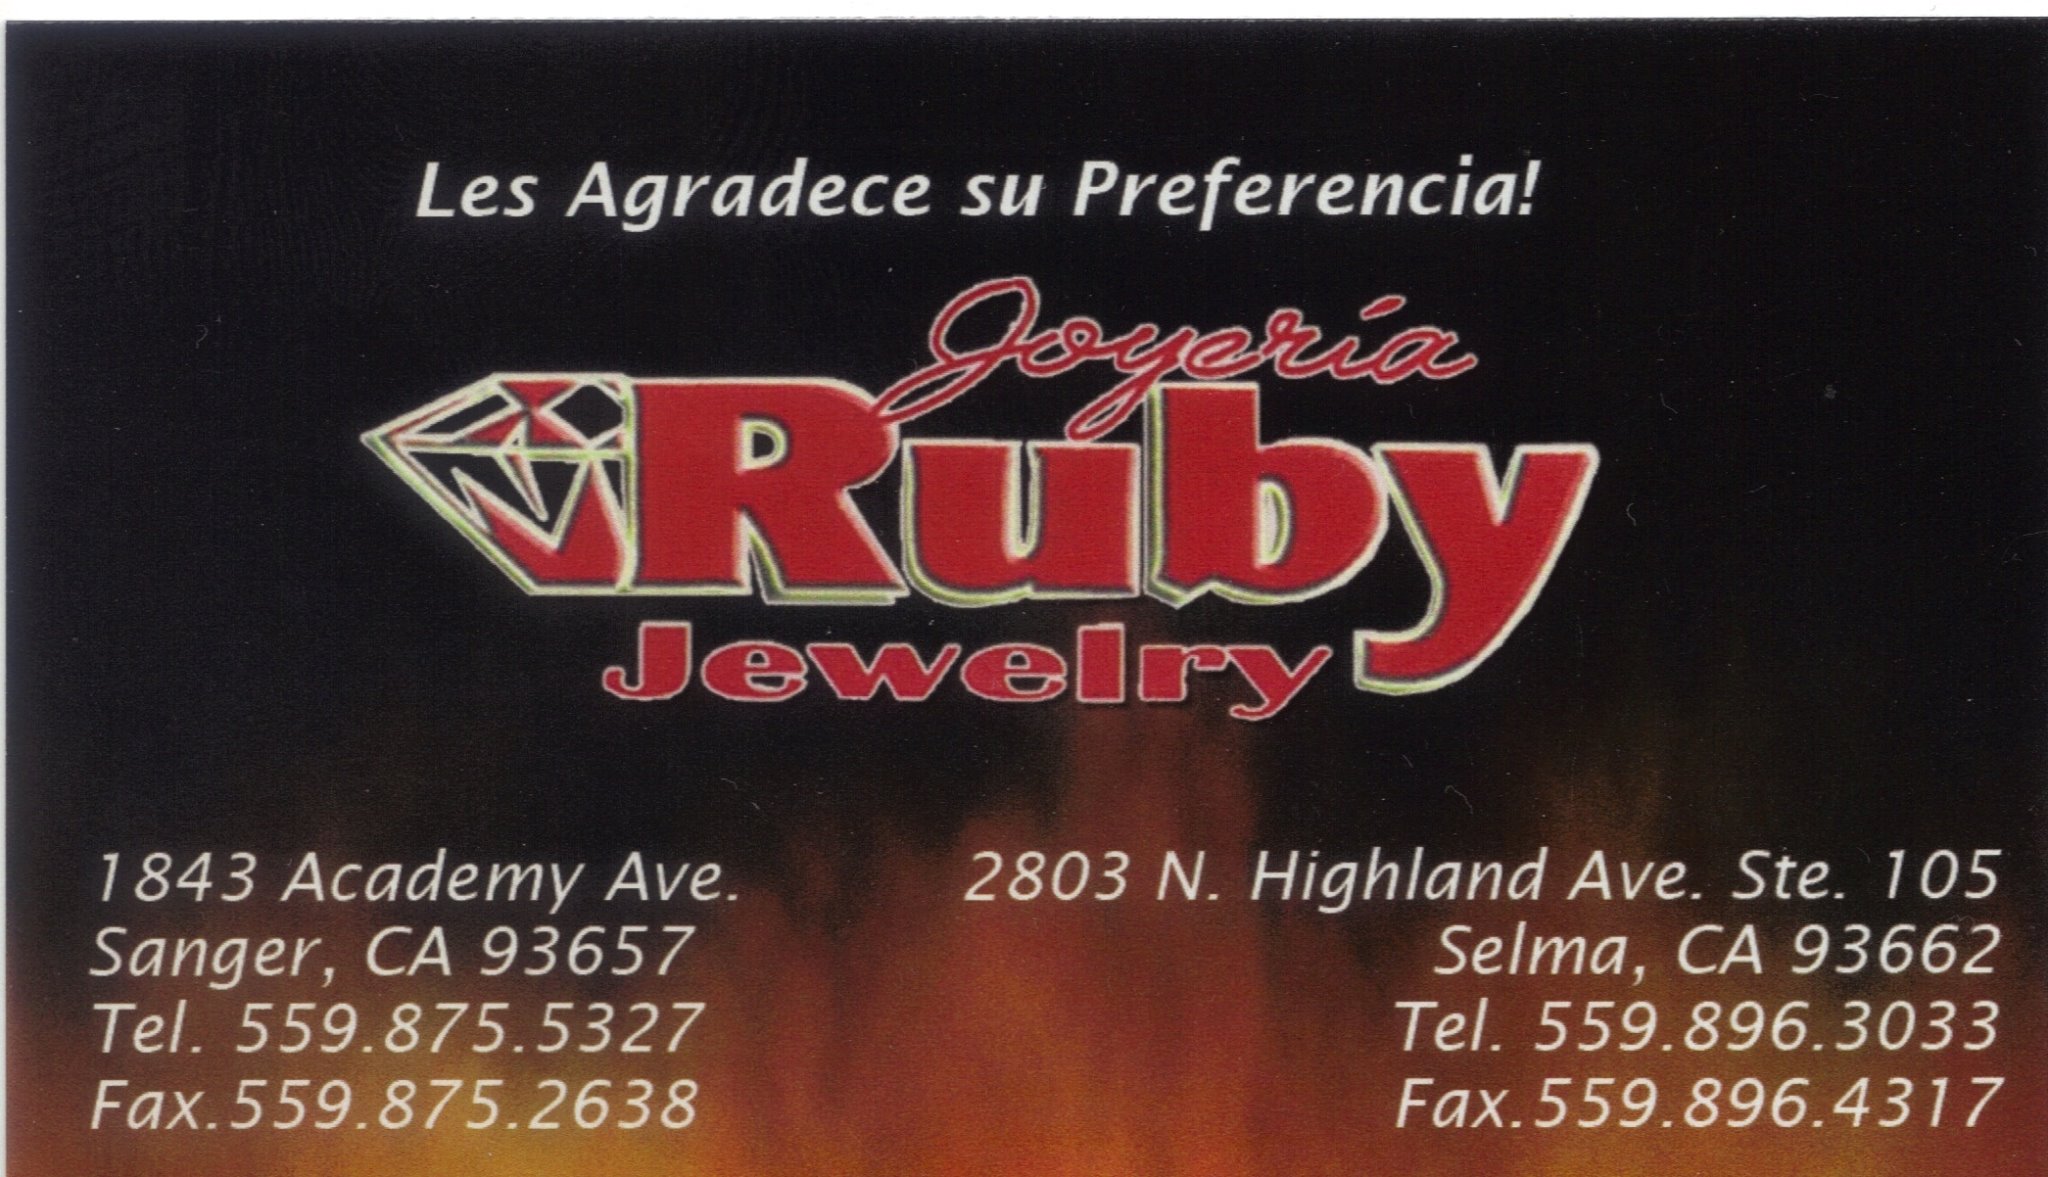 Ruby Jewelry 1843 Academy Ave, Sanger California 93657